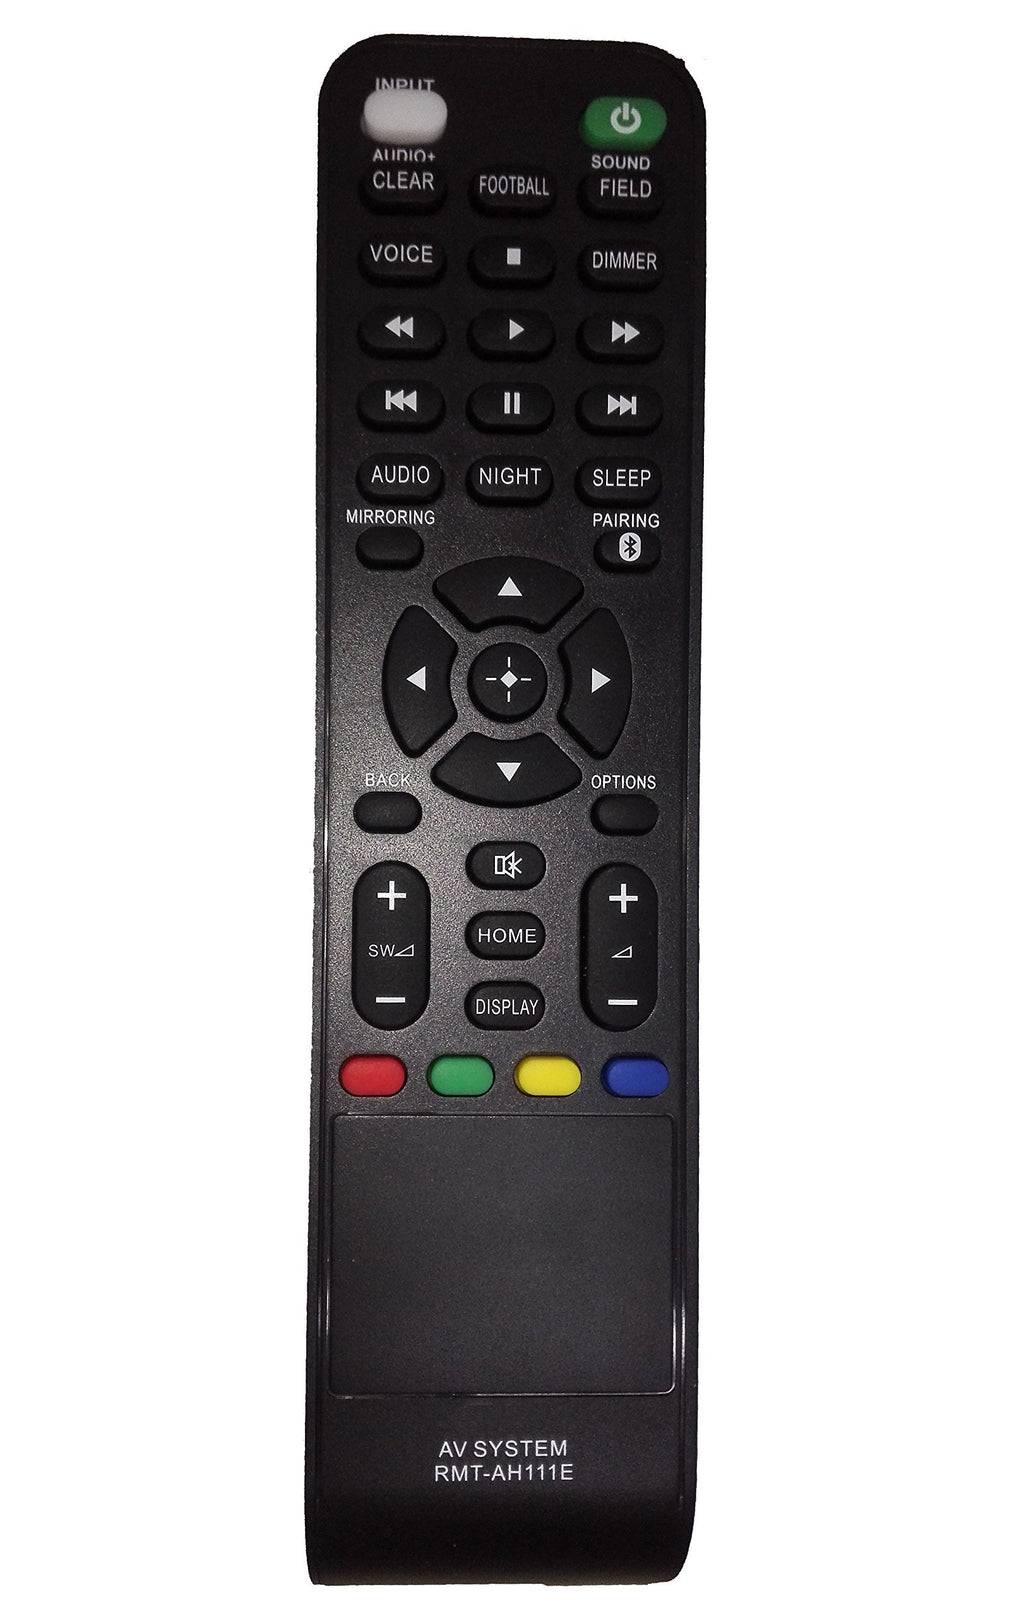 New RMT-AH111E RMTAH111E Remote Control fits for Sony Home Theatre System SA-RT5 SA-ST9 HT-RT5 HT-ST9 1-492-937-11